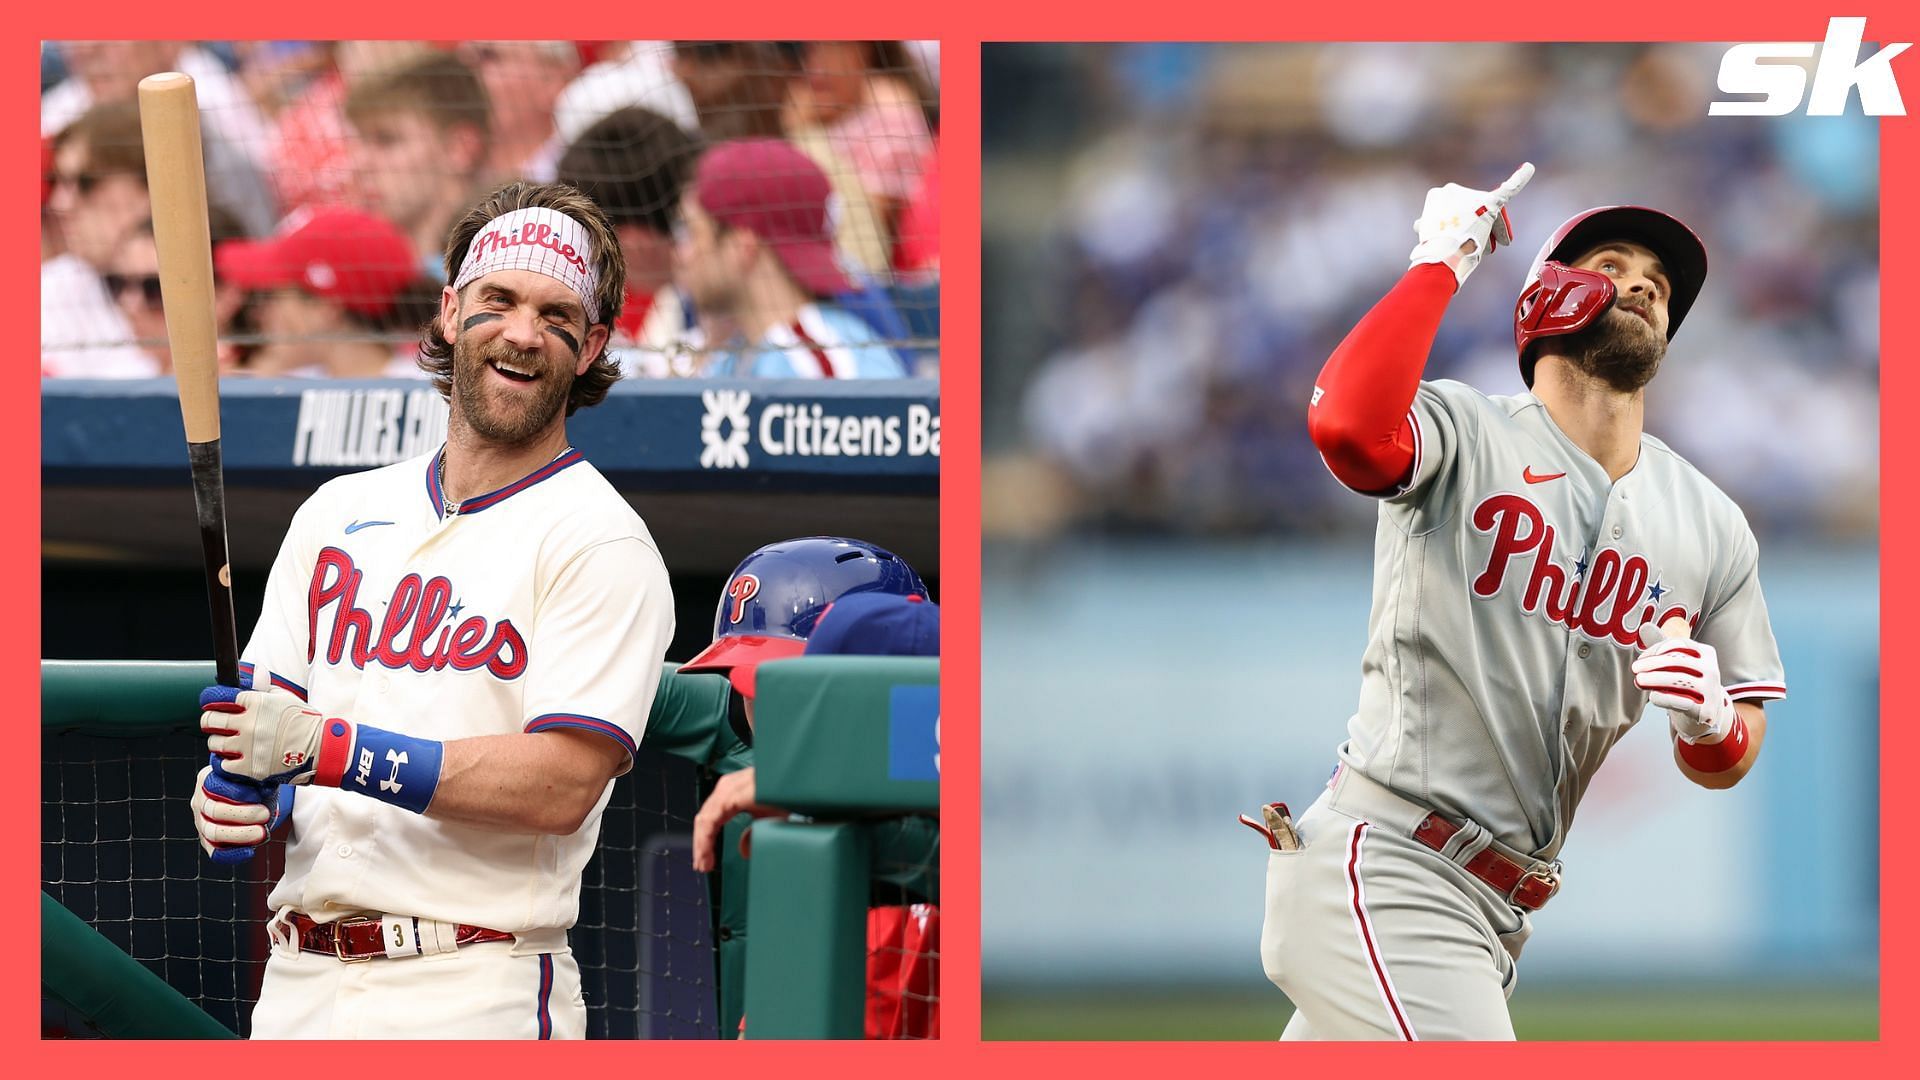 Bryce Harper makes a bold Nats return, and A-Rod is back in the